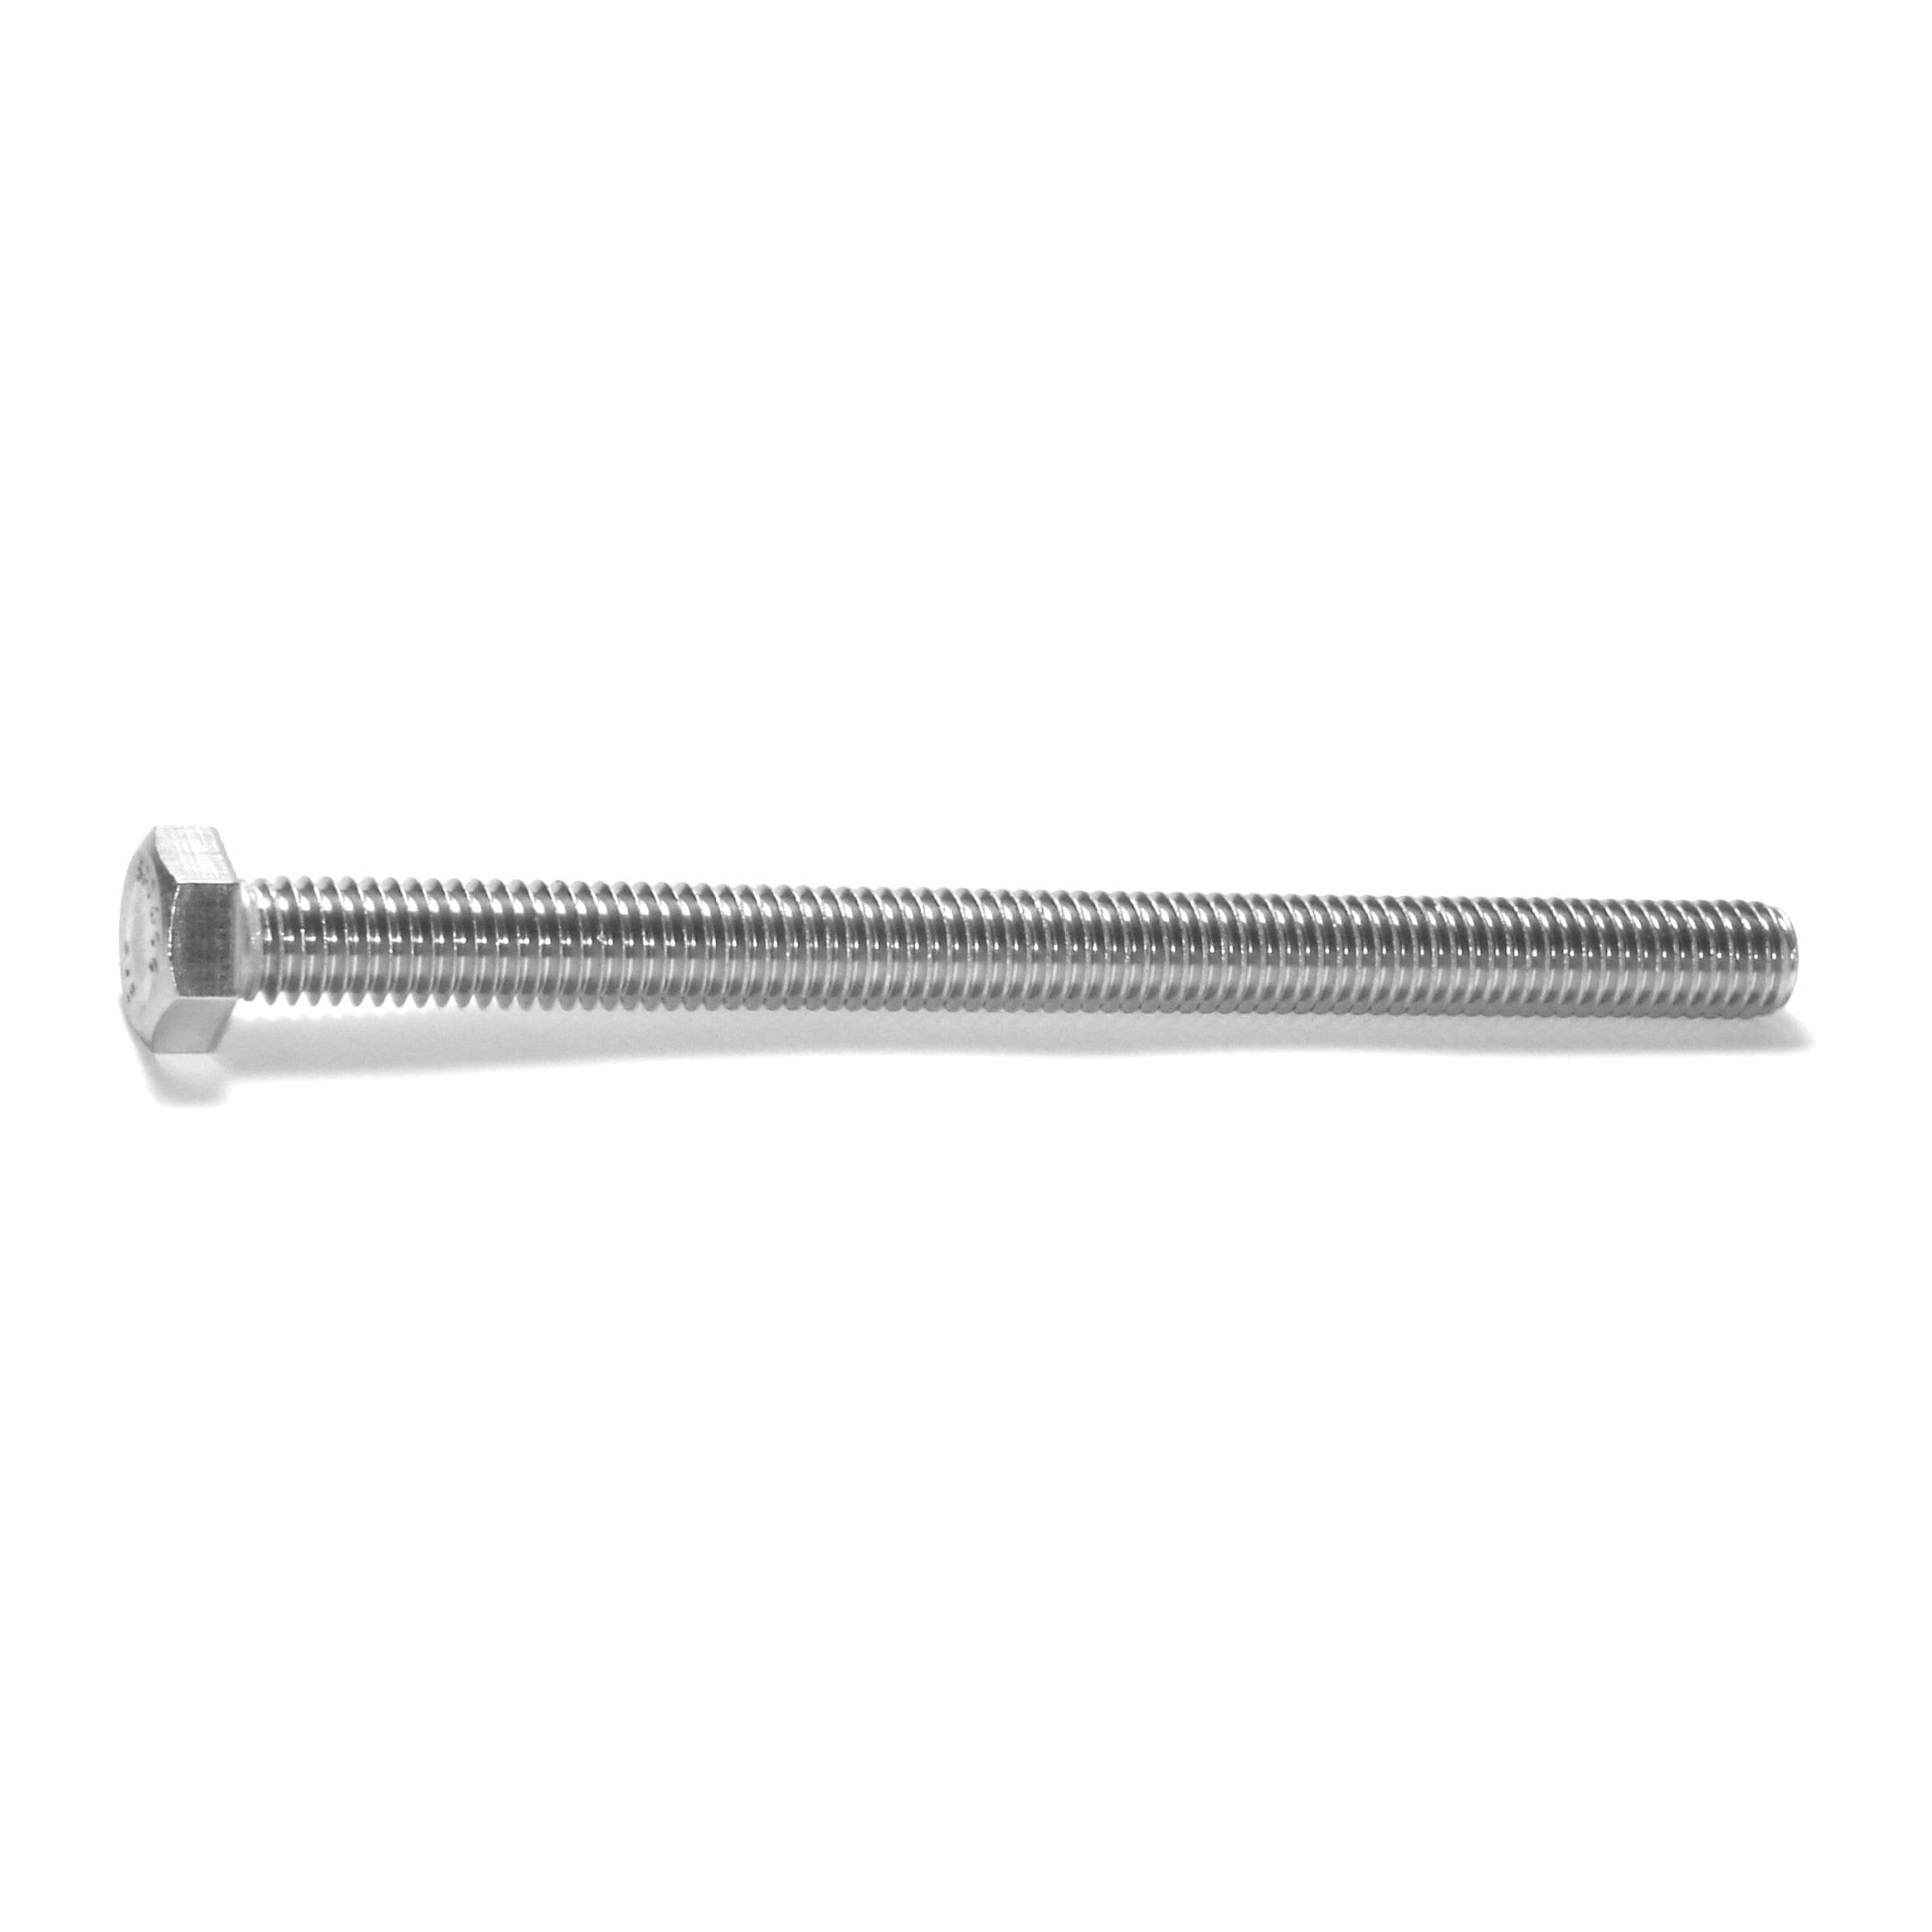 Fasteners, Bolts,3/8″-16 x 5″, Stainless Steel Hex Bolts